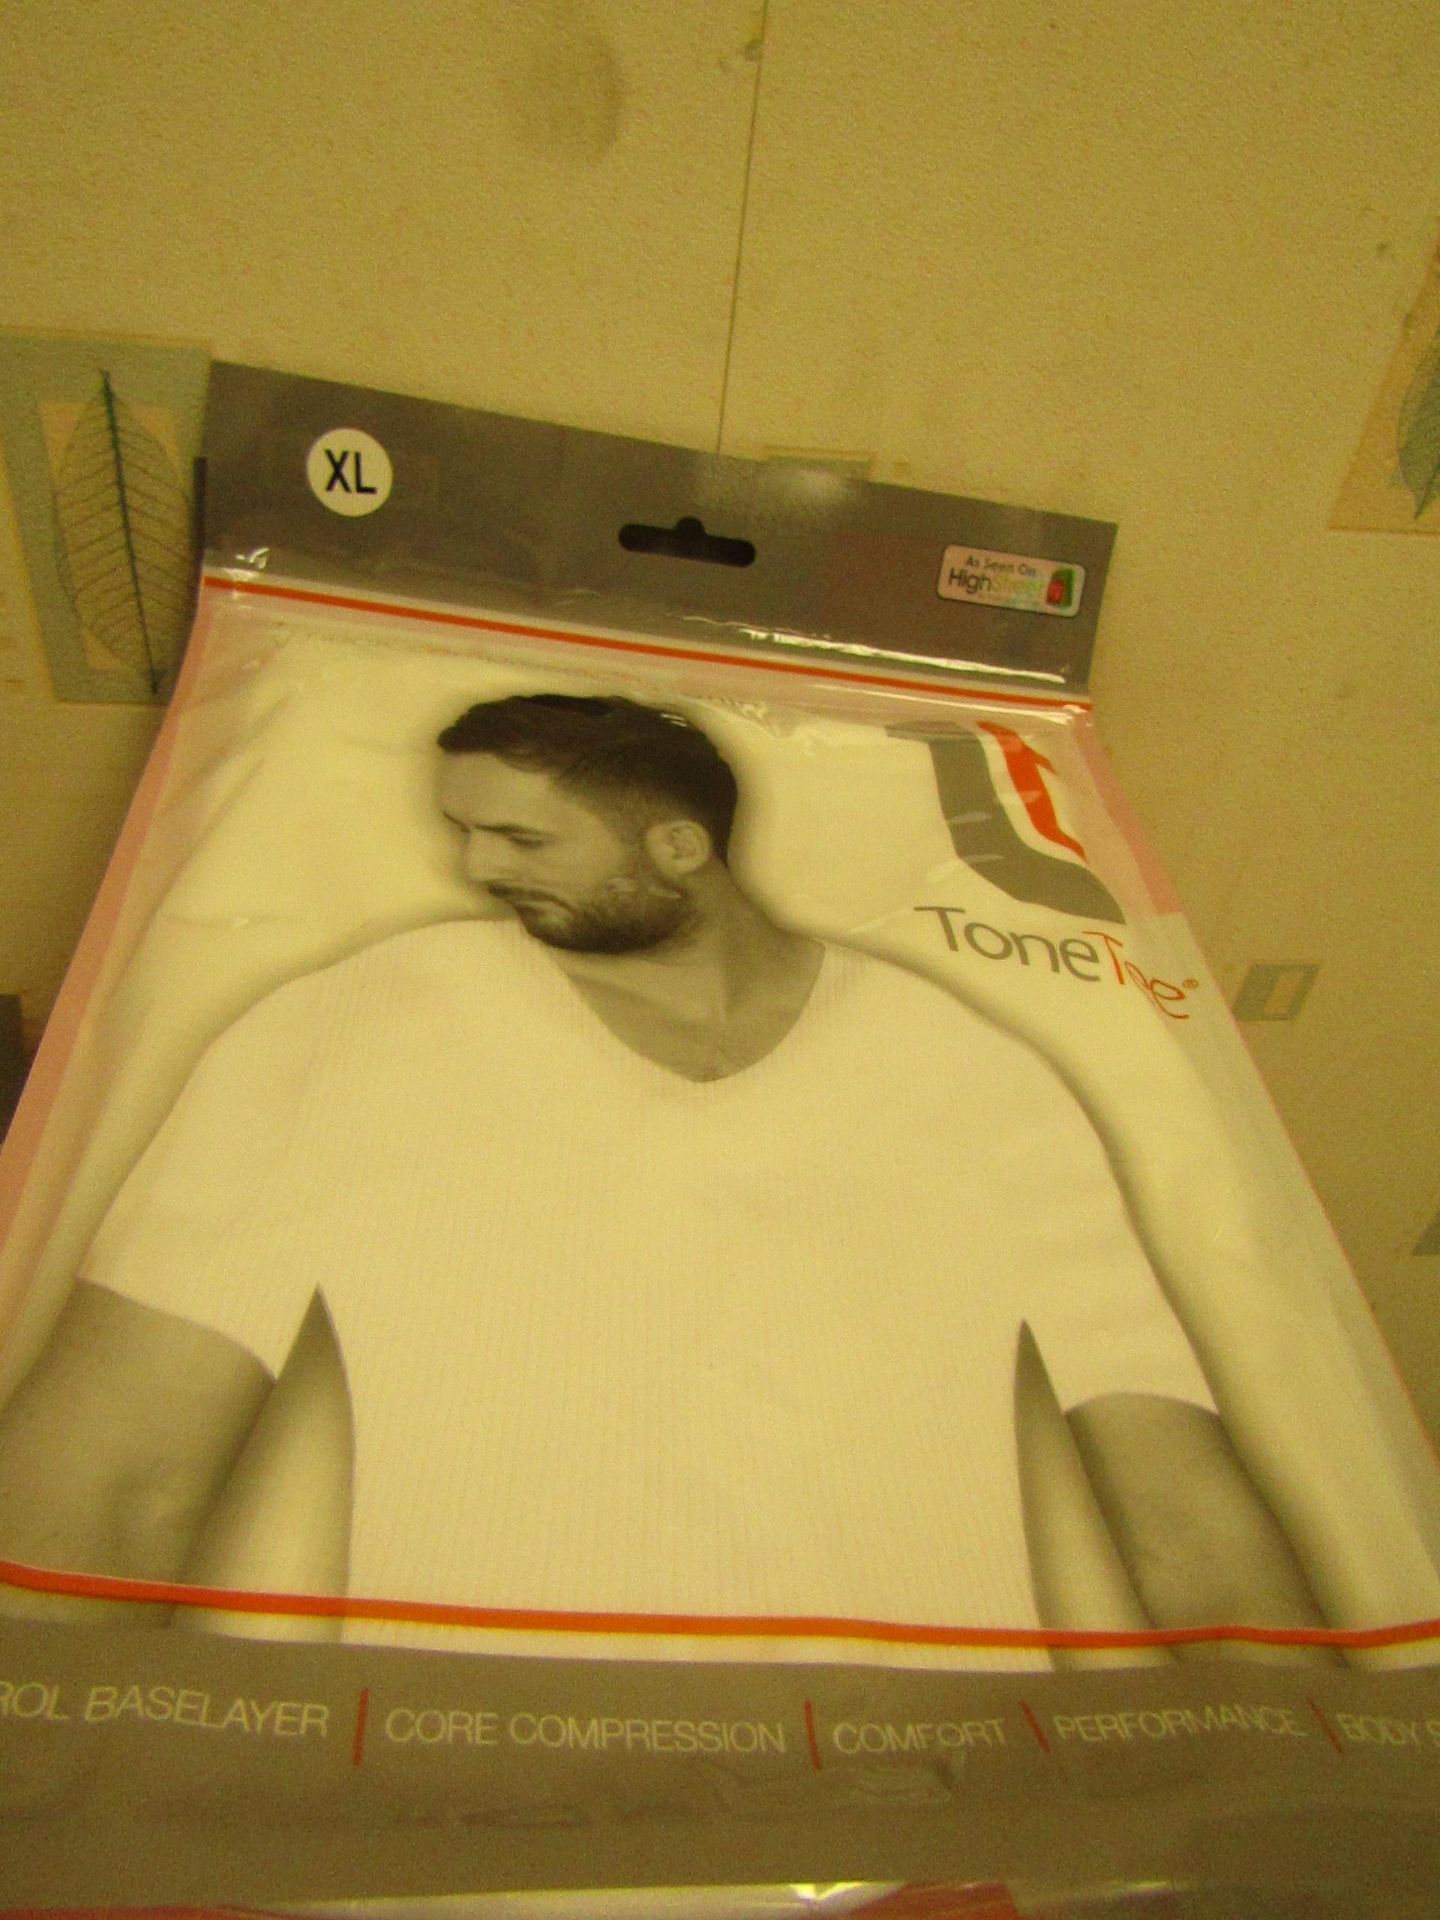 | 1x | MENS TONE TEE NECK COMPRESSION T-SHIRT WHITE SIZE XL | NEW & PACKAGED |